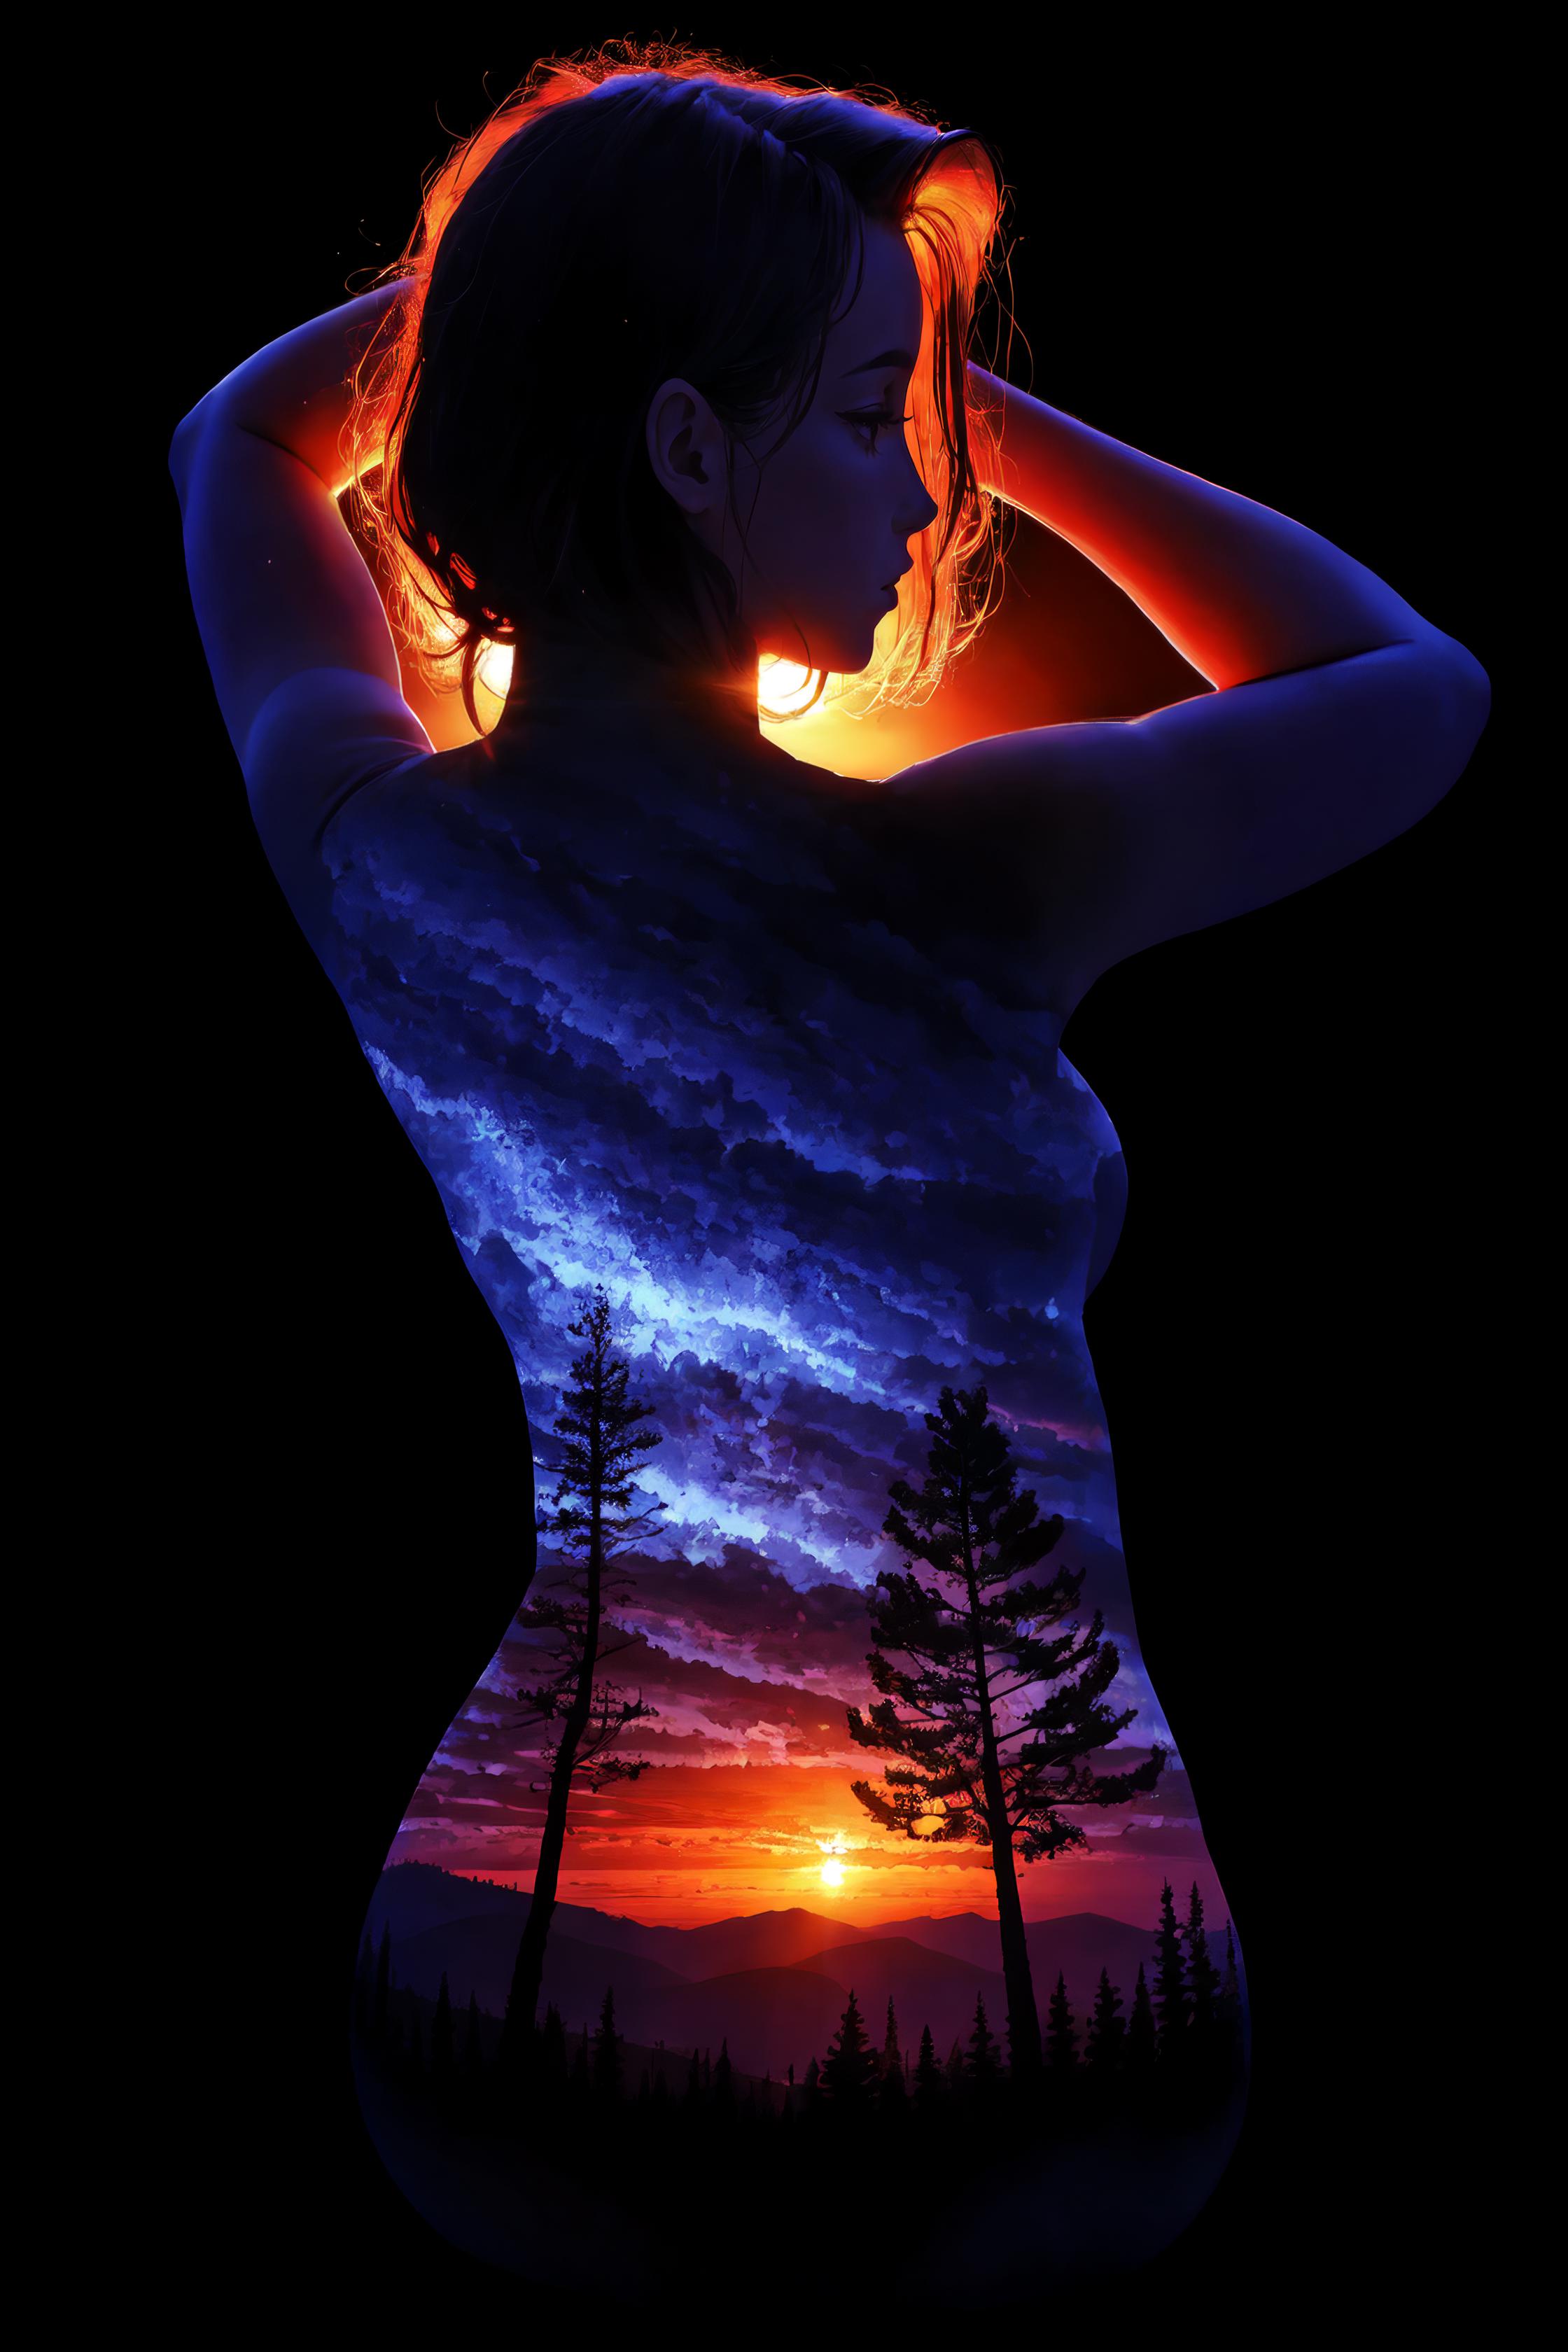 Artistic Poster or Painting of a Woman with a Treescape and Cloudscape Background